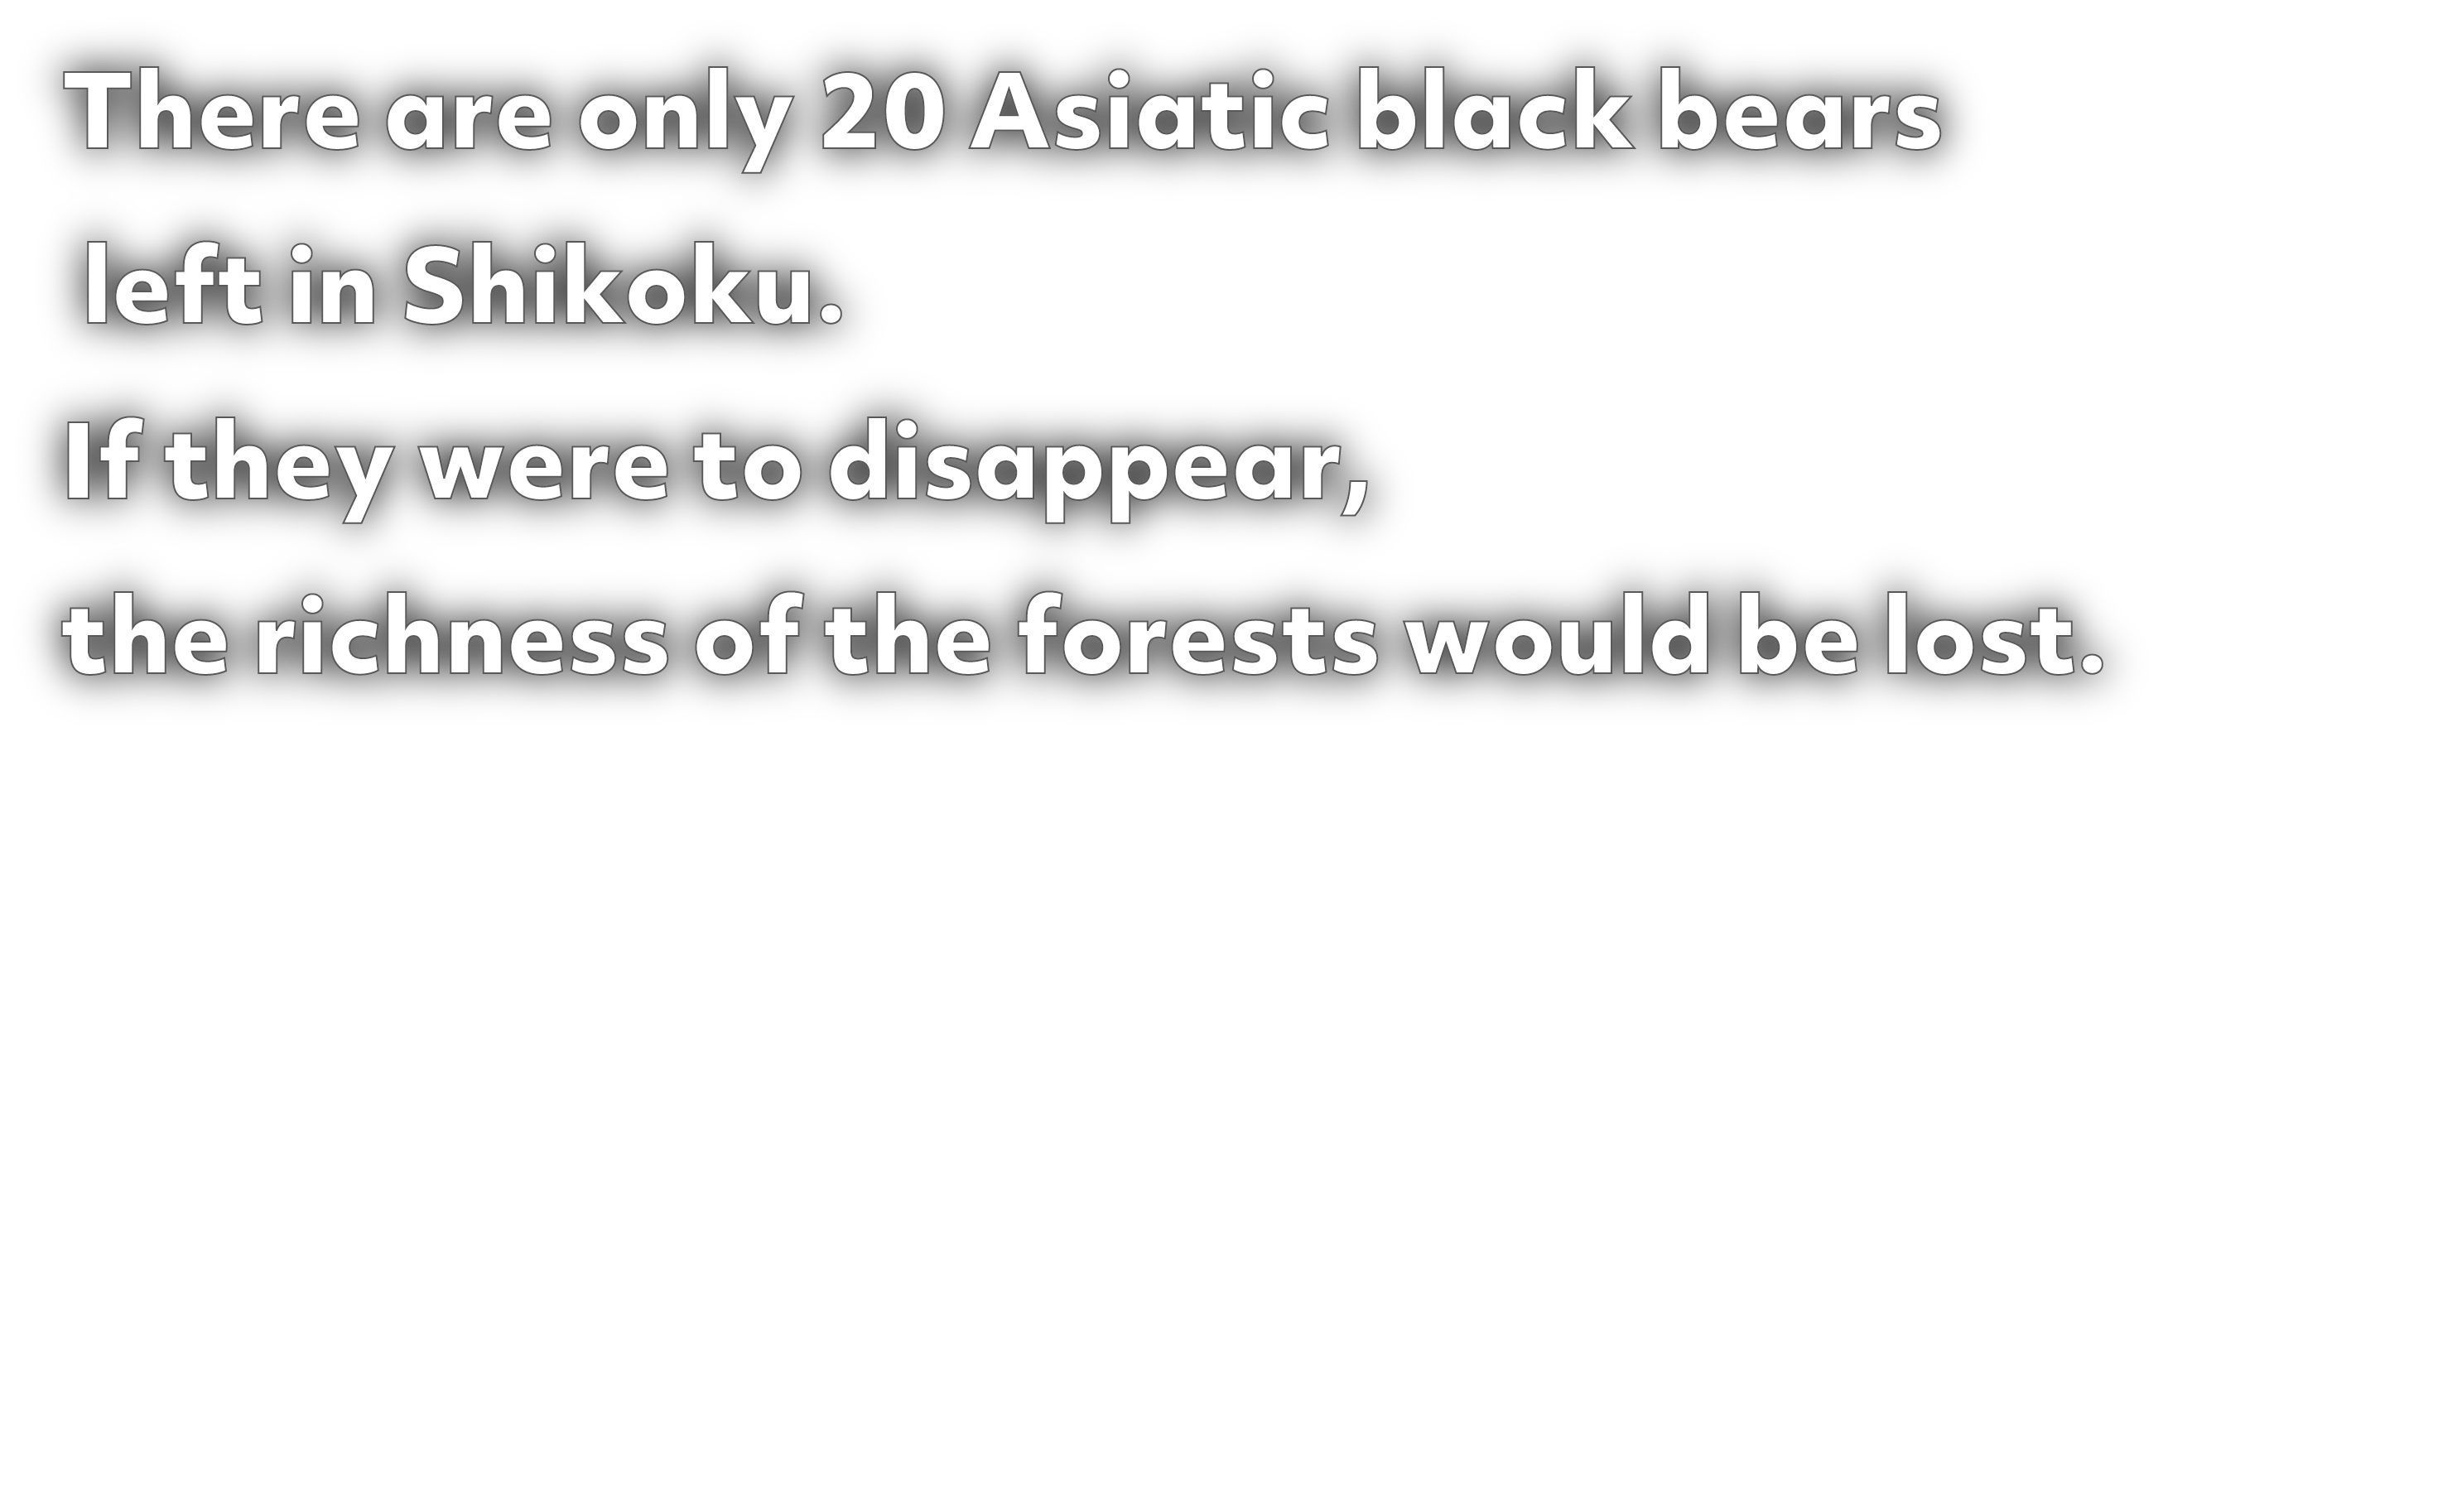 There are only 20 Asiatic black bears left in Shikoku. If they were to disappear, the richness of the forests would be lost.